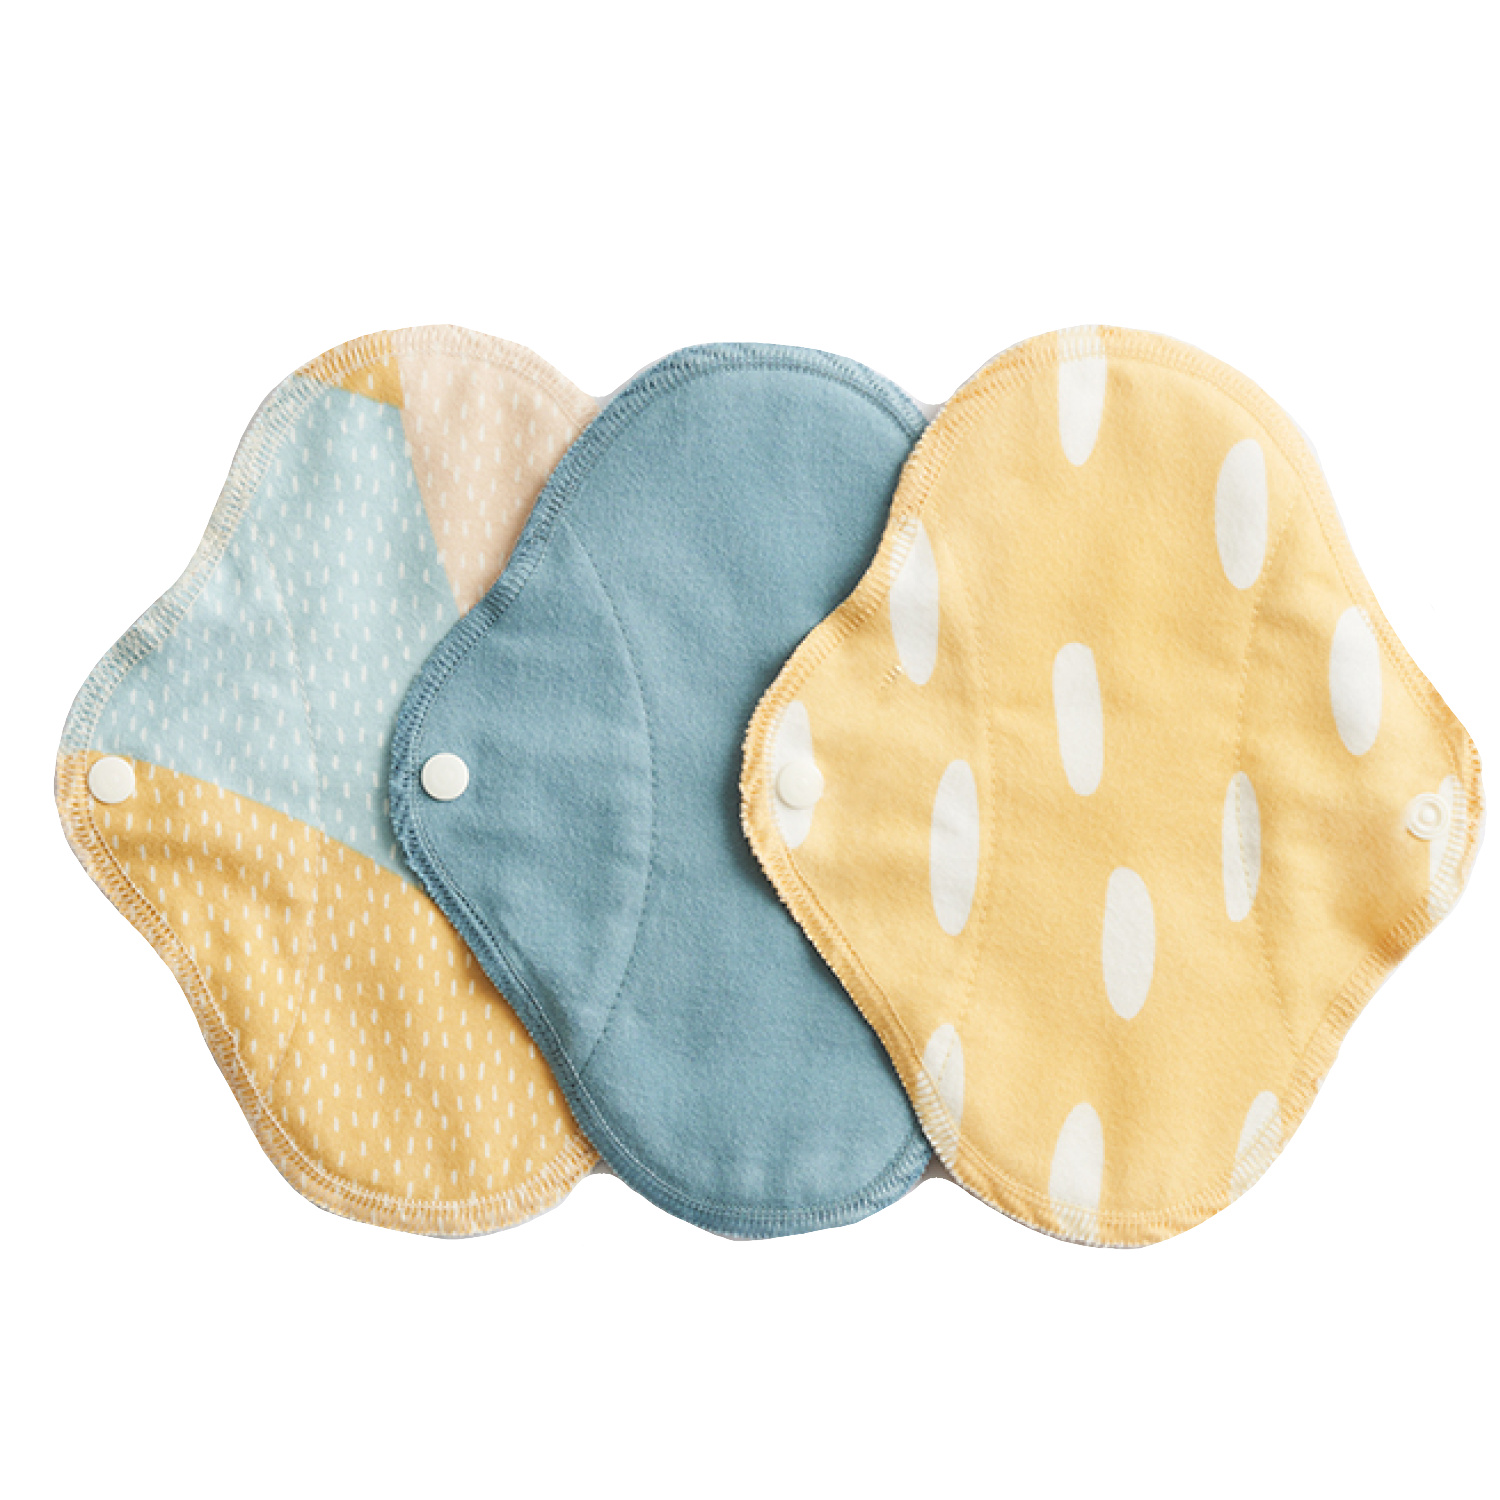 Imse Panty Liners & Cloth Pads (Classic) - 3 Pk